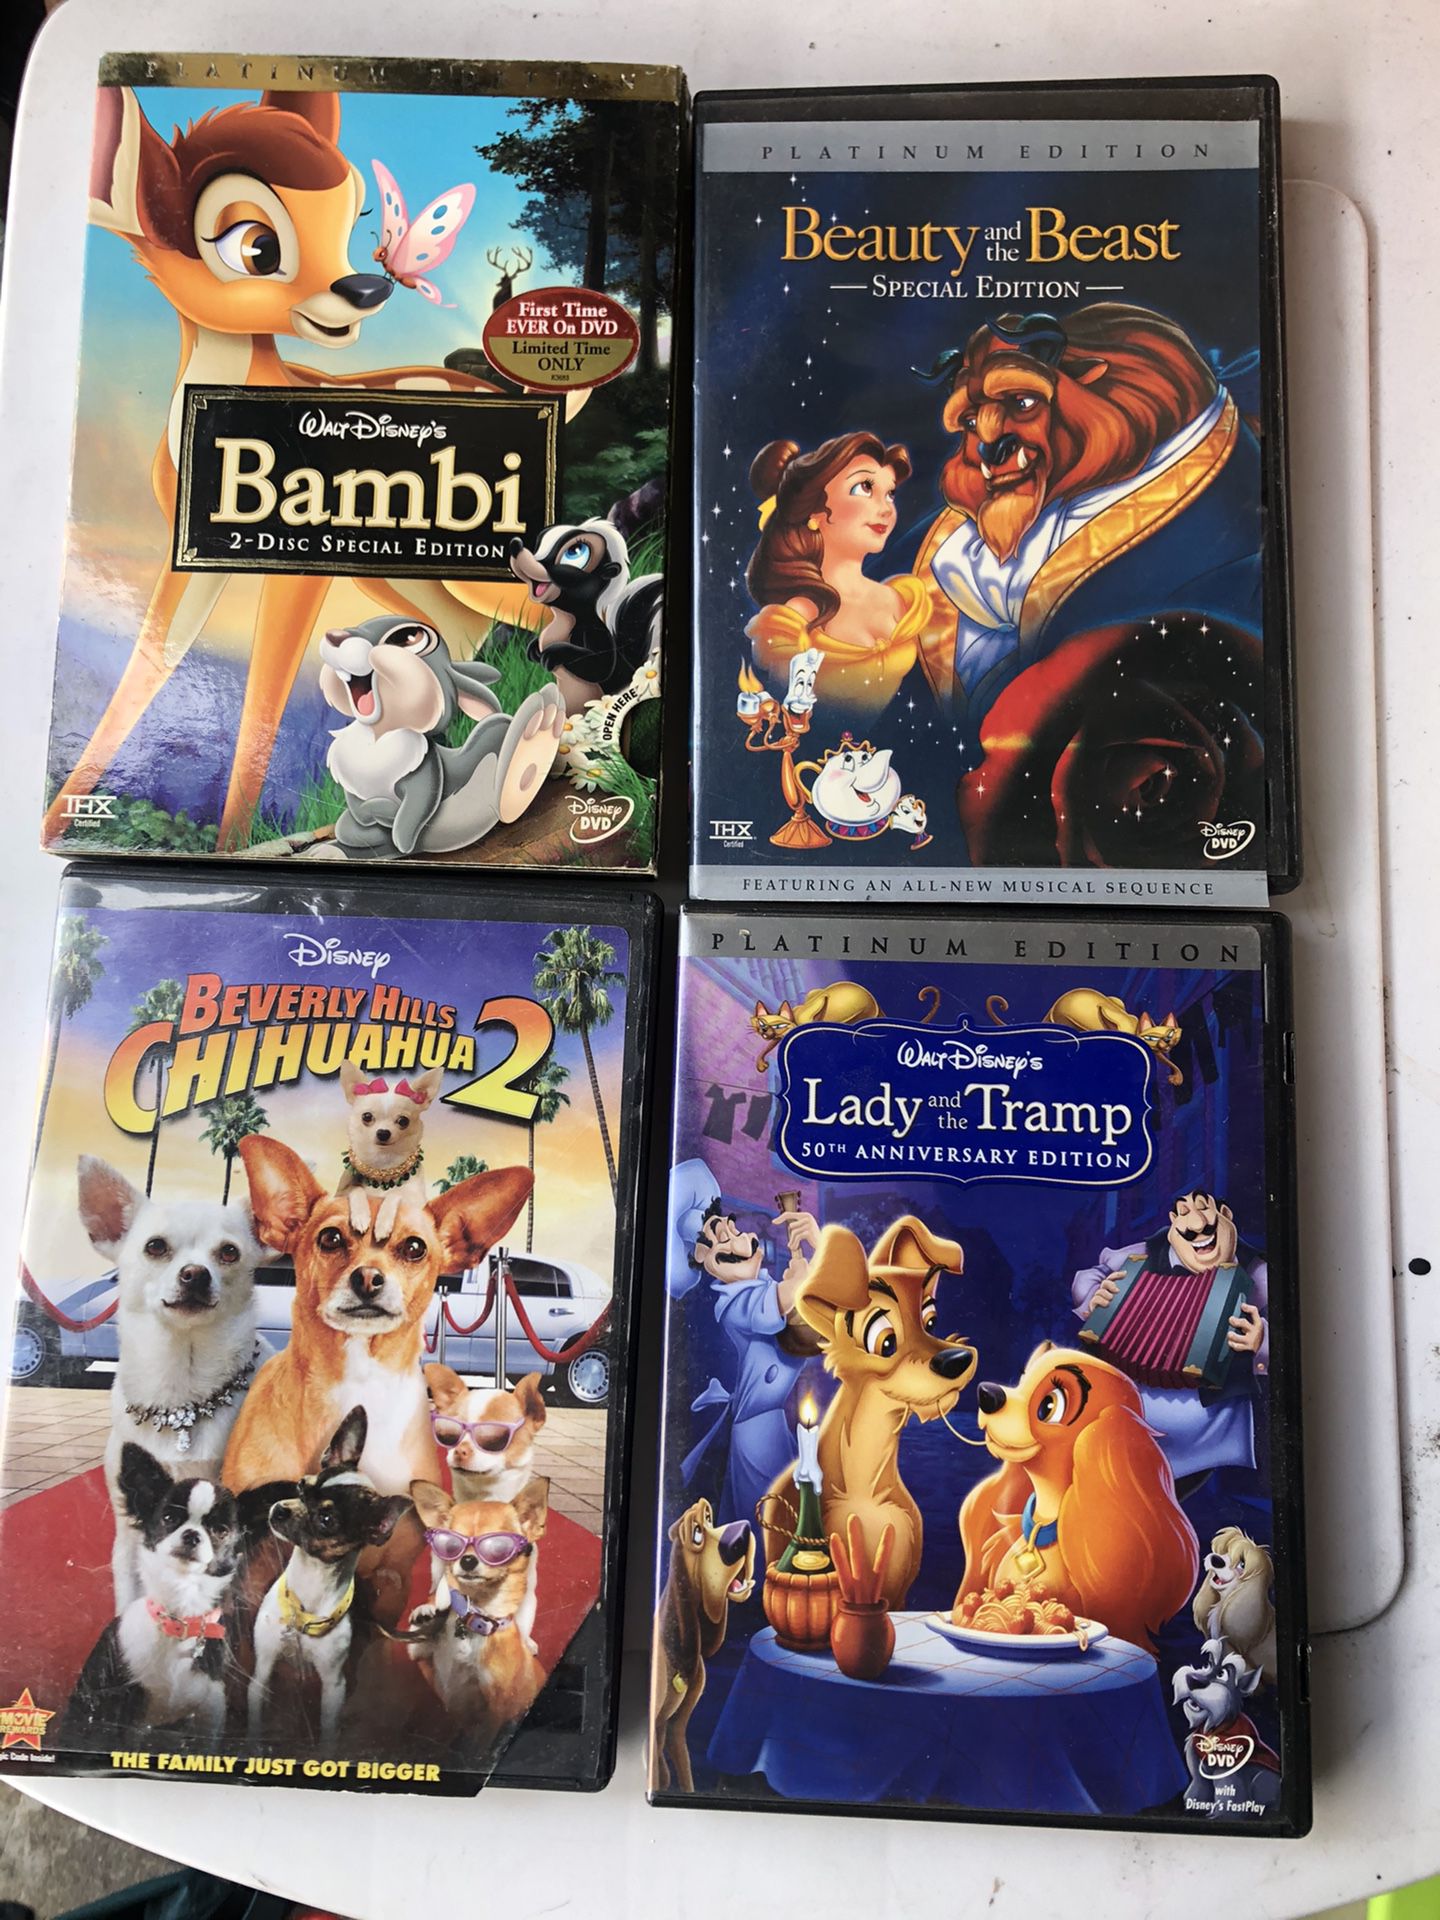 Disney DVD collection - Beauty in the Beast, Bambi, Lady and the Tramp